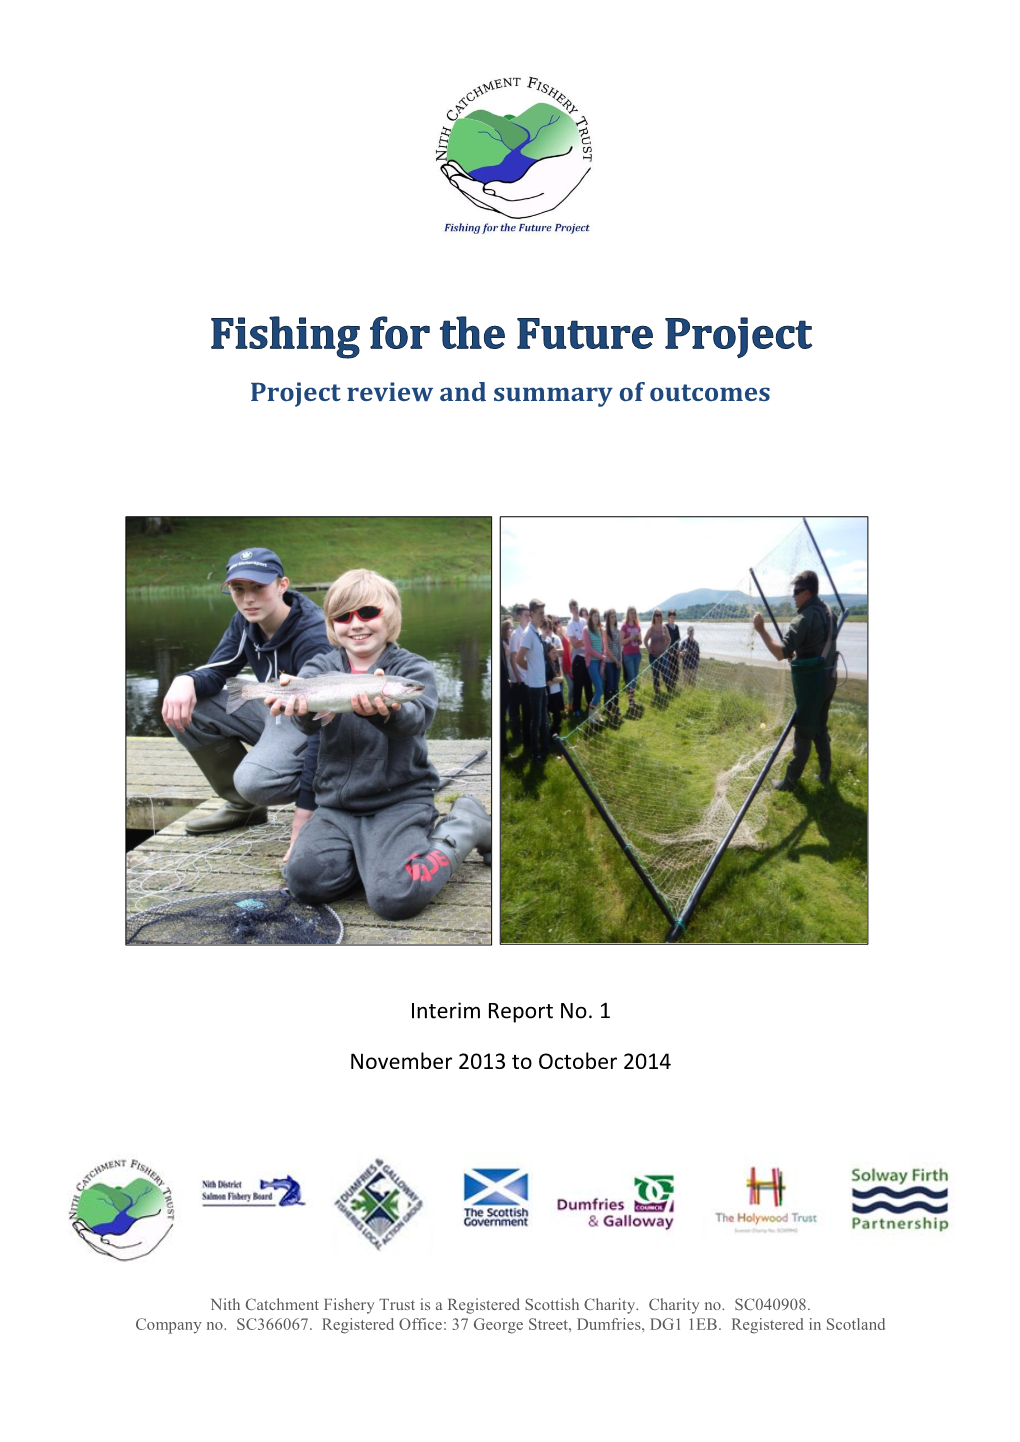 Fishing for the Future Year One Report 2014